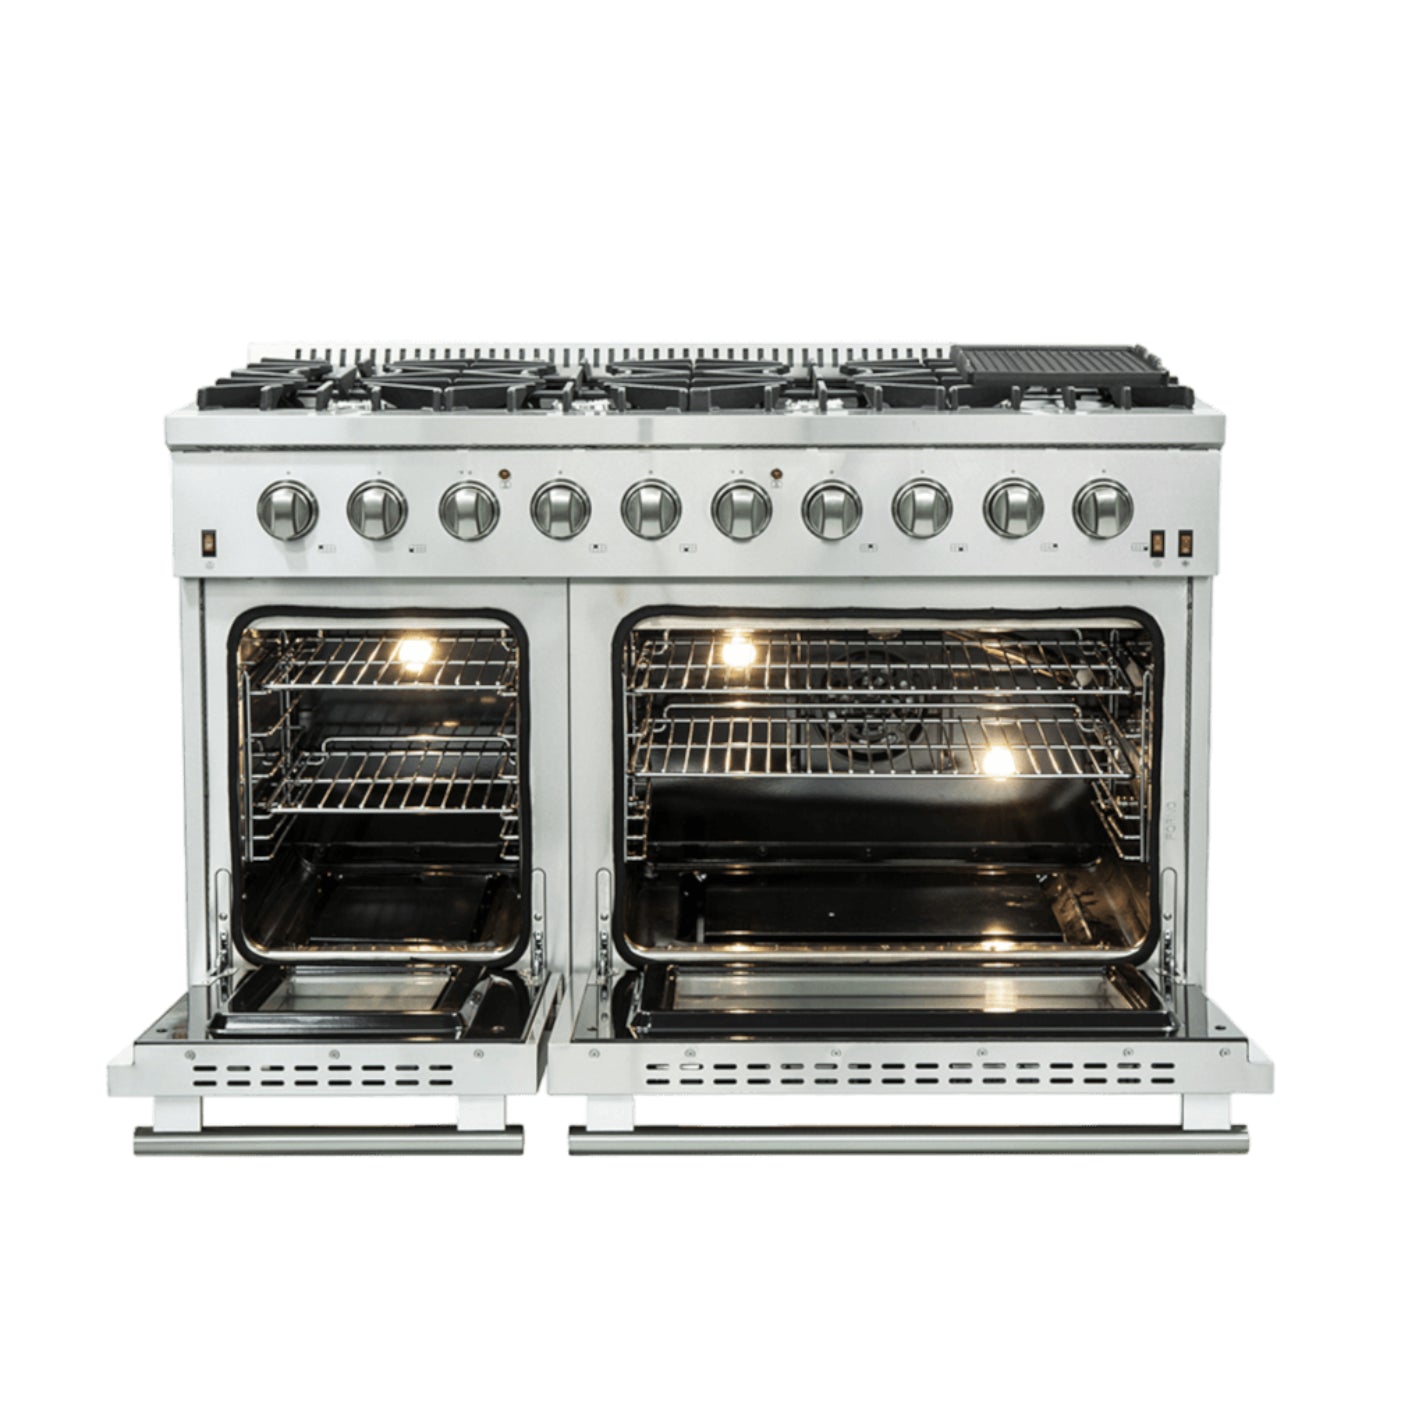 Forno Galiano 48-inch Freestanding Gas Range All Stainless Steel, 8 Burners, Griddle, 6.58 cu. ft. Double Ovens, FFSGS6244-48